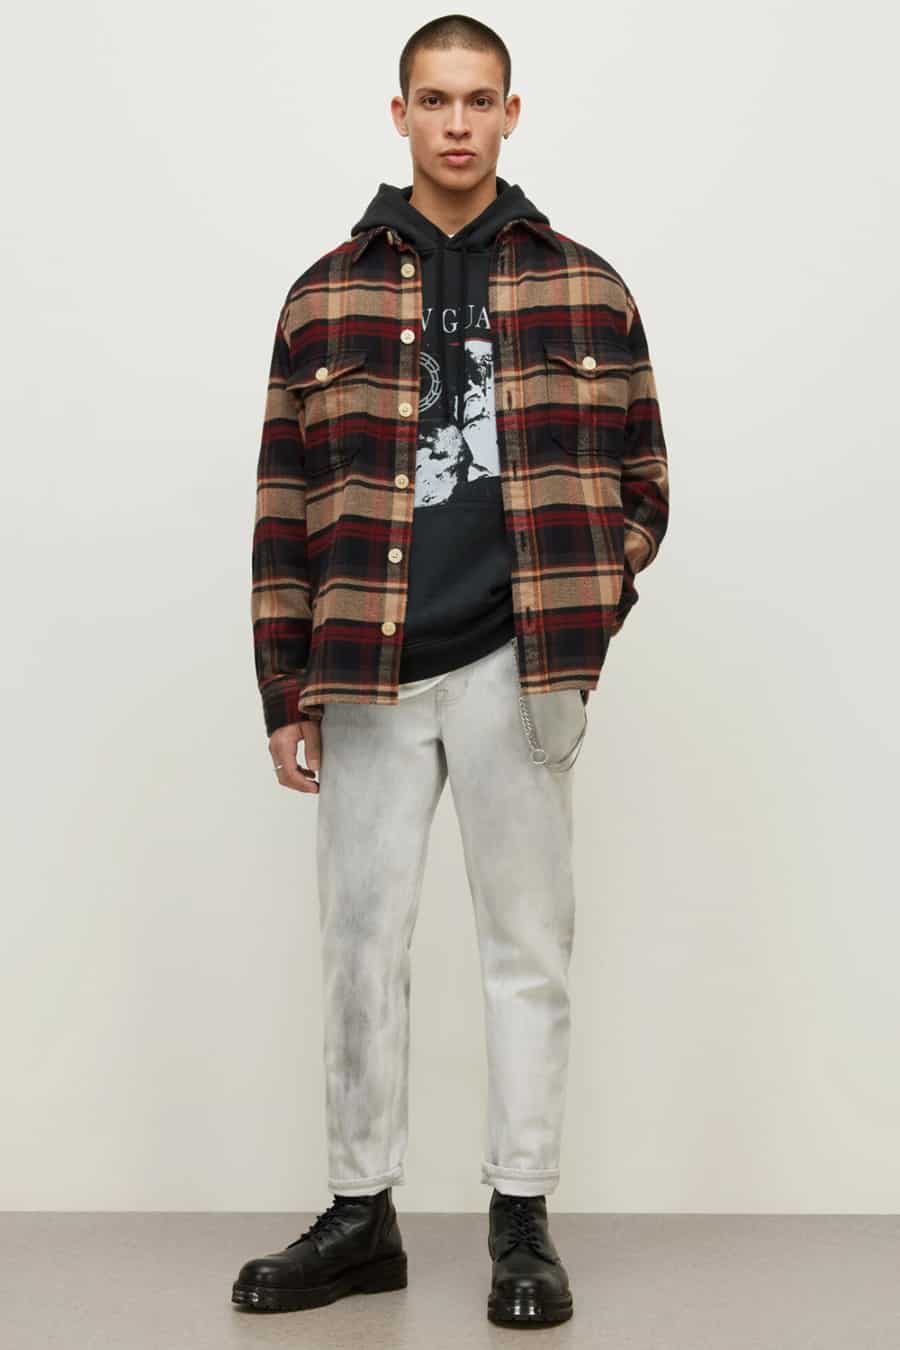 Men's washed grey jeans, black printed hoodie, red and brown check flannel shirt and black boots outfit